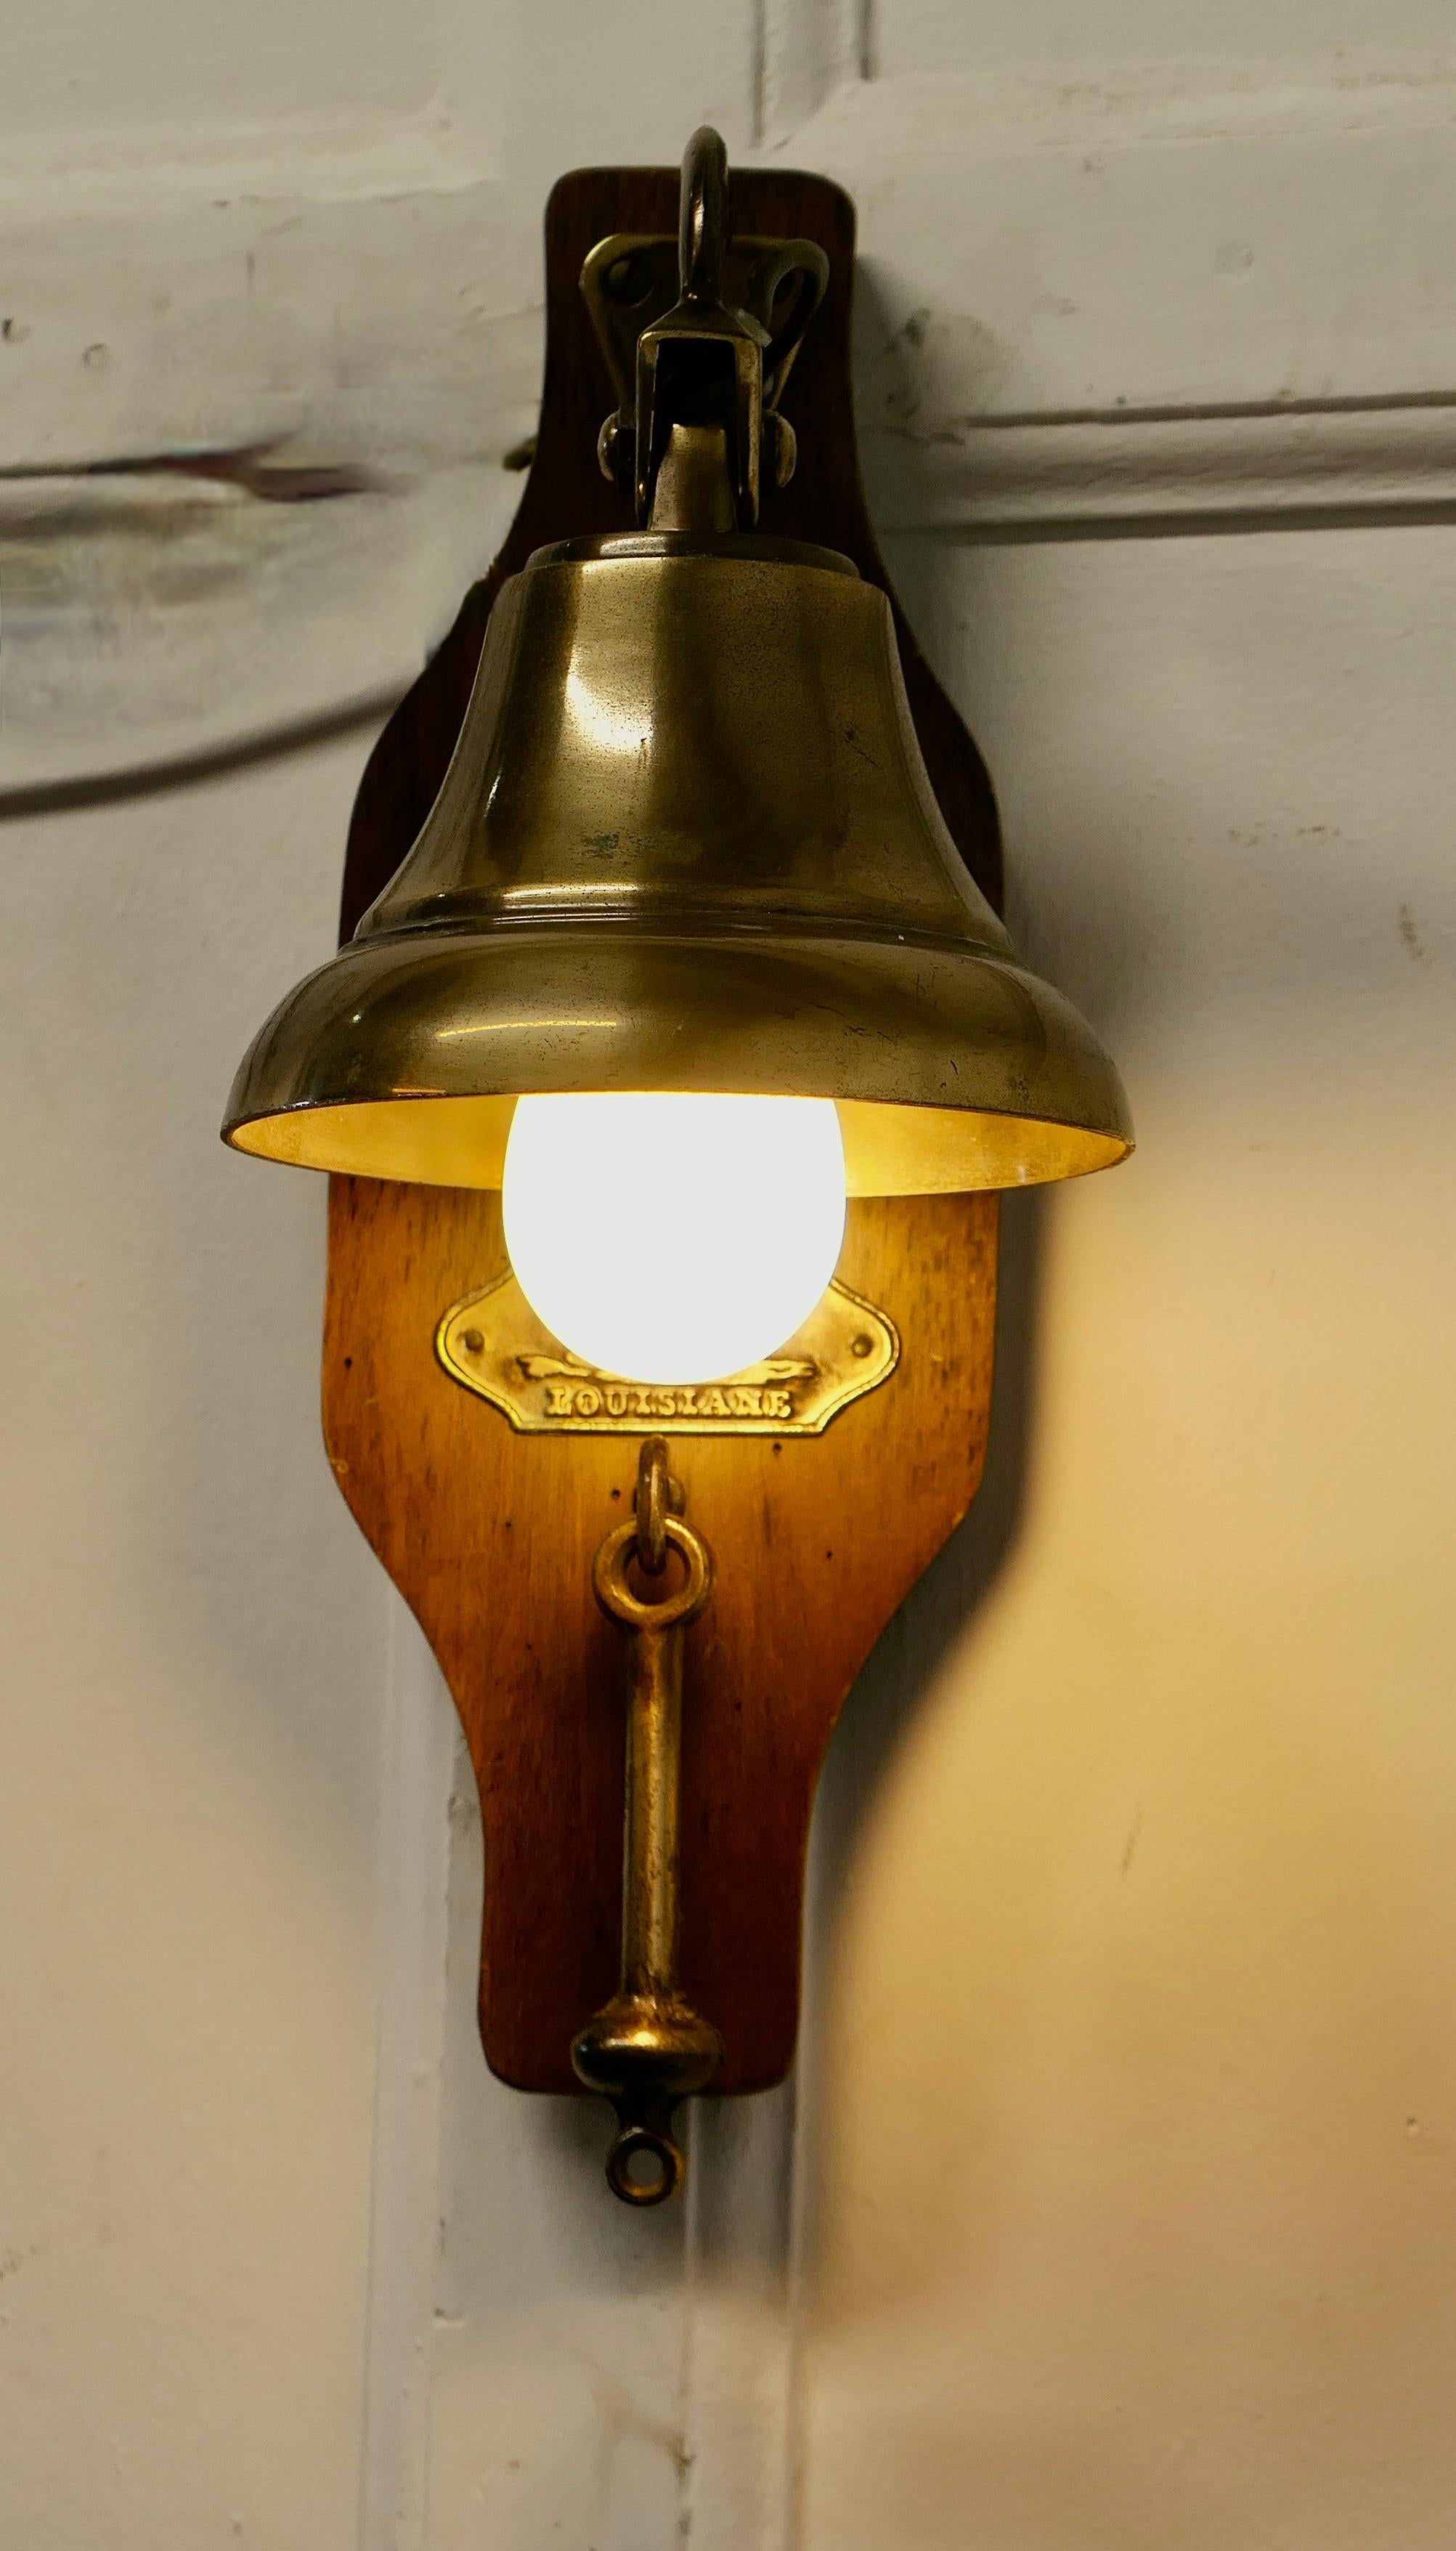 French Brass Door Bell, Porch Light on a Nautical Theme

An unusual piece, the bell is rung by tapping it with the clapper which hangs underneath, the lightbulb is concealed inside the dome of the bell
This is all set on a chestnut bracket which has